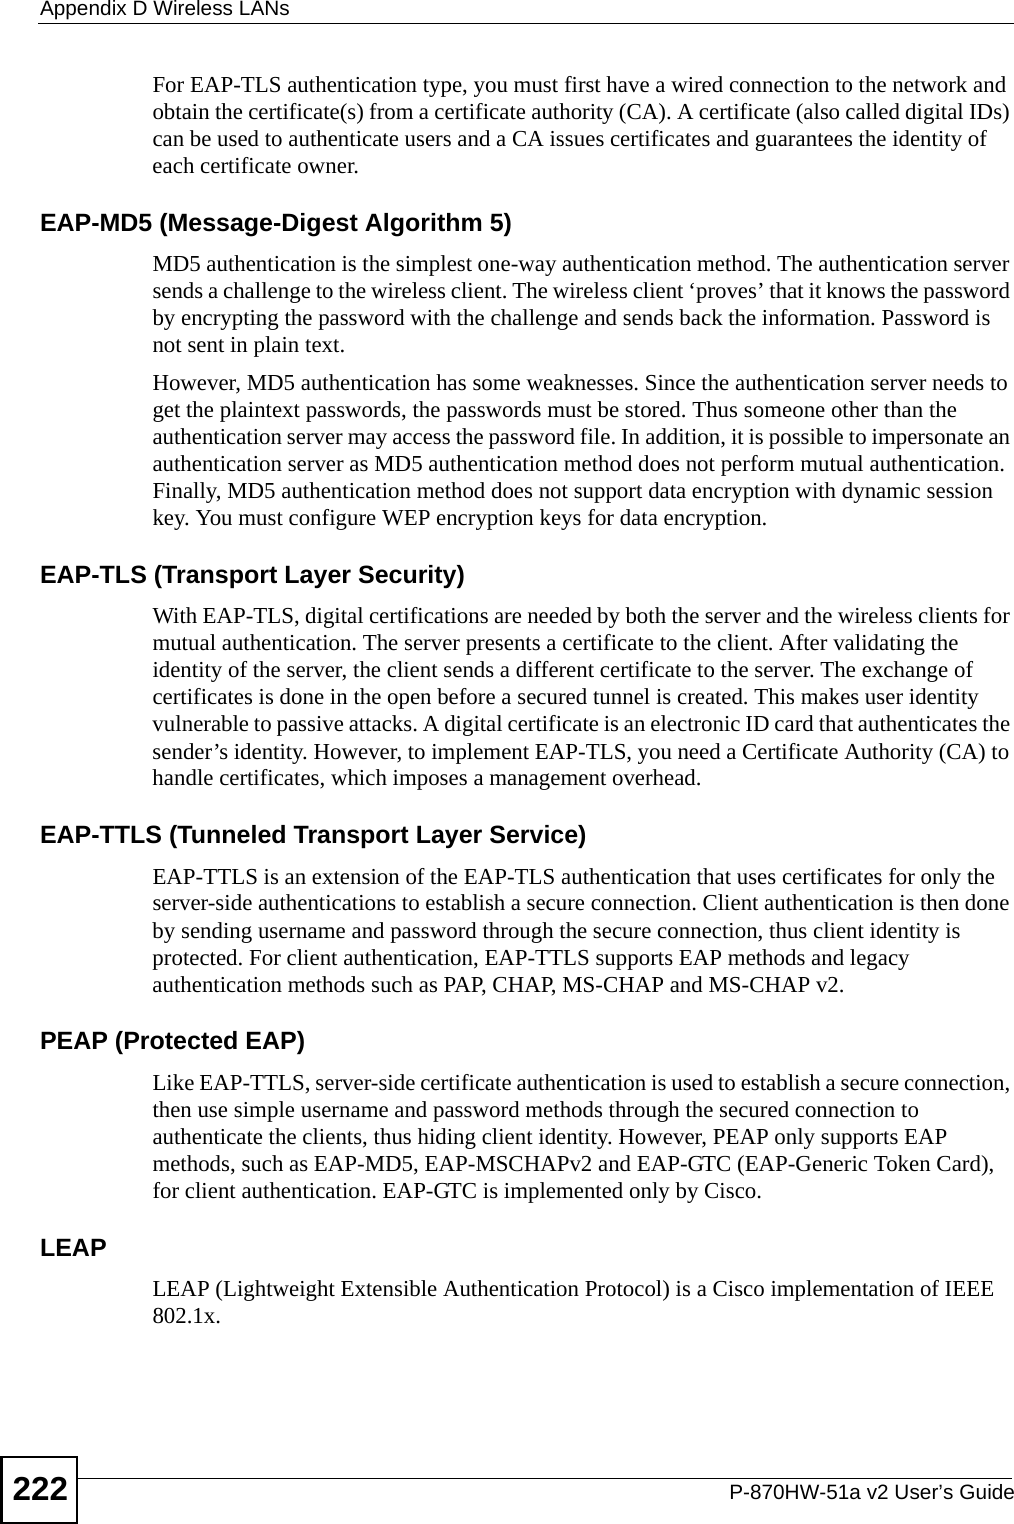 Appendix D Wireless LANsP-870HW-51a v2 User’s Guide222For EAP-TLS authentication type, you must first have a wired connection to the network and obtain the certificate(s) from a certificate authority (CA). A certificate (also called digital IDs) can be used to authenticate users and a CA issues certificates and guarantees the identity of each certificate owner.EAP-MD5 (Message-Digest Algorithm 5)MD5 authentication is the simplest one-way authentication method. The authentication server sends a challenge to the wireless client. The wireless client ‘proves’ that it knows the password by encrypting the password with the challenge and sends back the information. Password is not sent in plain text. However, MD5 authentication has some weaknesses. Since the authentication server needs to get the plaintext passwords, the passwords must be stored. Thus someone other than the authentication server may access the password file. In addition, it is possible to impersonate an authentication server as MD5 authentication method does not perform mutual authentication. Finally, MD5 authentication method does not support data encryption with dynamic session key. You must configure WEP encryption keys for data encryption. EAP-TLS (Transport Layer Security)With EAP-TLS, digital certifications are needed by both the server and the wireless clients for mutual authentication. The server presents a certificate to the client. After validating the identity of the server, the client sends a different certificate to the server. The exchange of certificates is done in the open before a secured tunnel is created. This makes user identity vulnerable to passive attacks. A digital certificate is an electronic ID card that authenticates the sender’s identity. However, to implement EAP-TLS, you need a Certificate Authority (CA) to handle certificates, which imposes a management overhead. EAP-TTLS (Tunneled Transport Layer Service) EAP-TTLS is an extension of the EAP-TLS authentication that uses certificates for only the server-side authentications to establish a secure connection. Client authentication is then done by sending username and password through the secure connection, thus client identity is protected. For client authentication, EAP-TTLS supports EAP methods and legacy authentication methods such as PAP, CHAP, MS-CHAP and MS-CHAP v2. PEAP (Protected EAP)   Like EAP-TTLS, server-side certificate authentication is used to establish a secure connection, then use simple username and password methods through the secured connection to authenticate the clients, thus hiding client identity. However, PEAP only supports EAP methods, such as EAP-MD5, EAP-MSCHAPv2 and EAP-GTC (EAP-Generic Token Card), for client authentication. EAP-GTC is implemented only by Cisco.LEAPLEAP (Lightweight Extensible Authentication Protocol) is a Cisco implementation of IEEE 802.1x. 